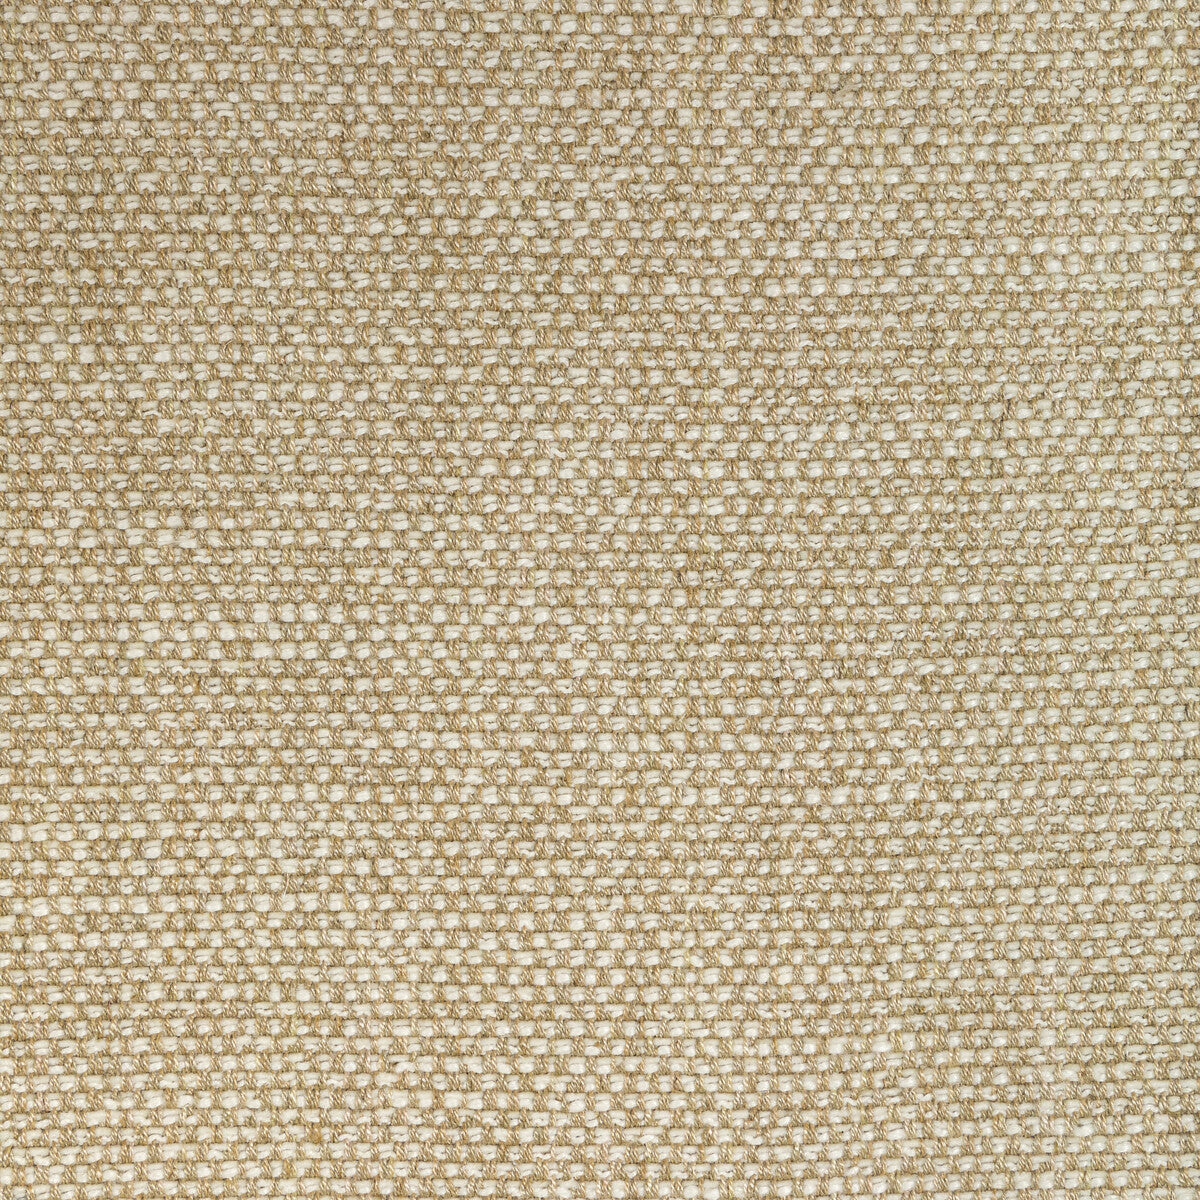 Edern Plain fabric in beige color - pattern 8022109.16.0 - by Brunschwig &amp; Fils in the Lorient Weaves collection